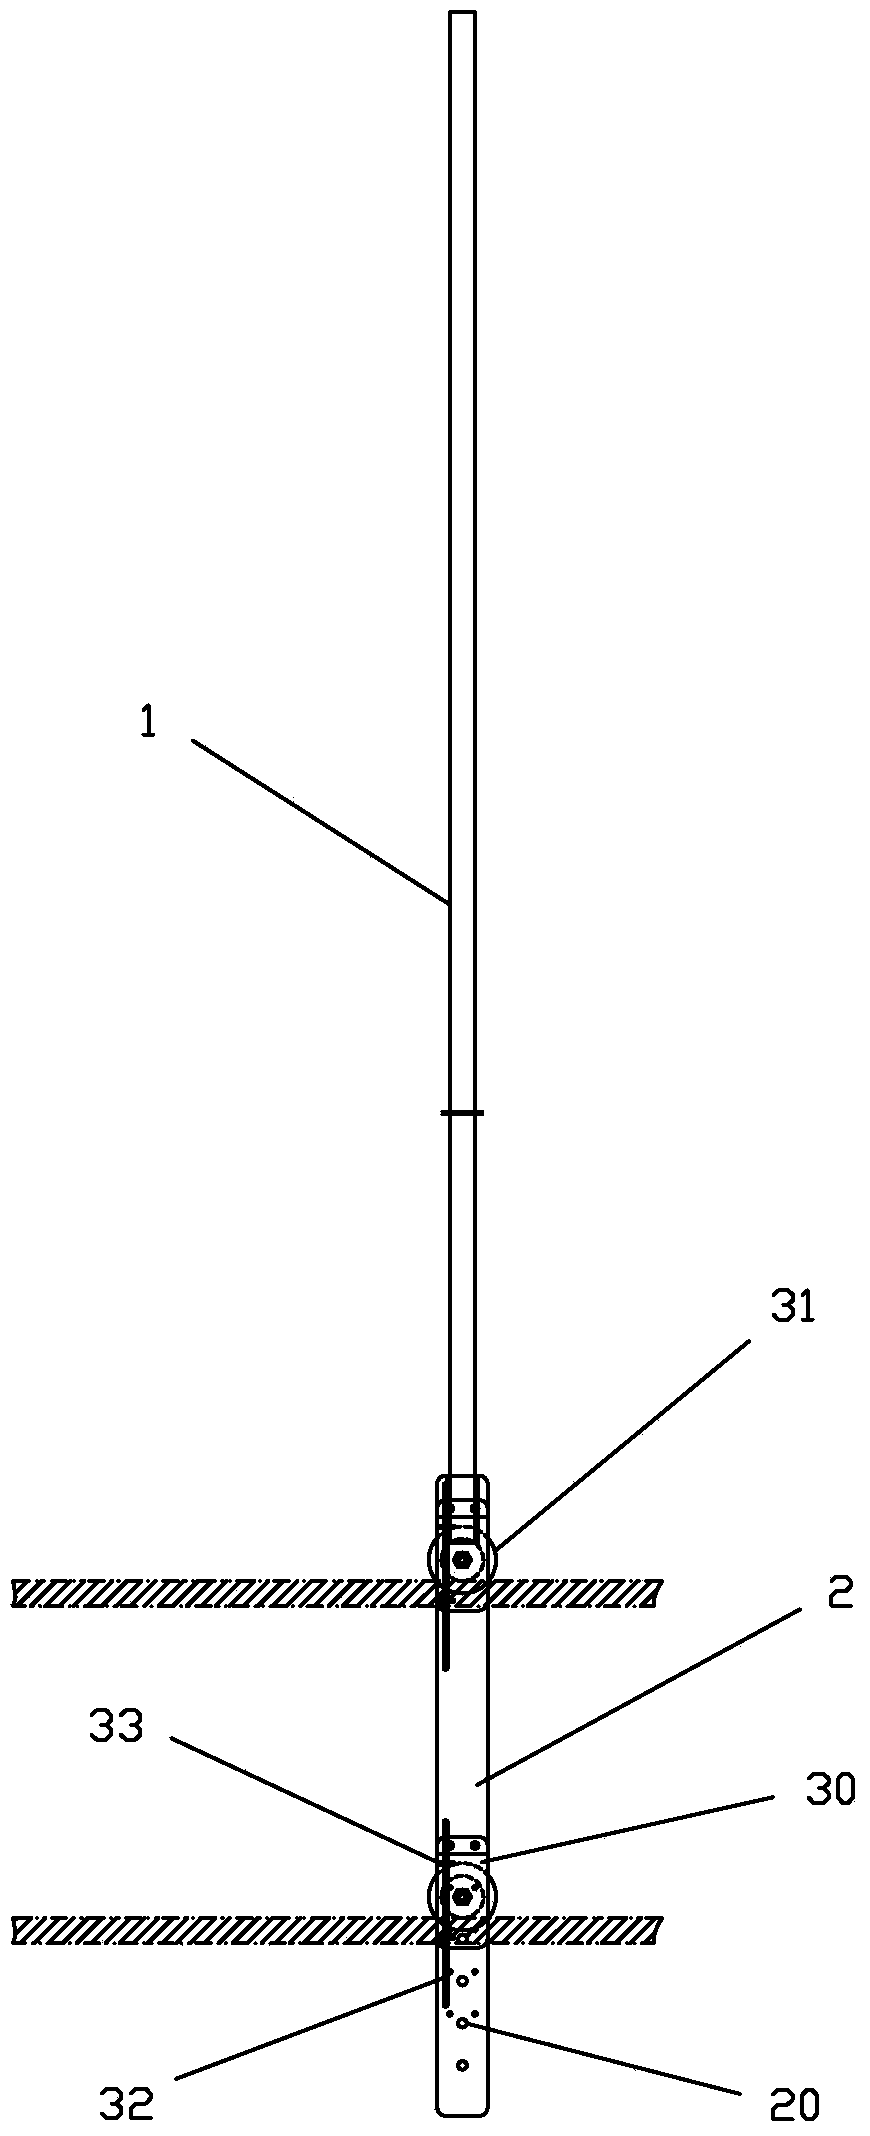 Live working phase spacing control device on equipotential wire